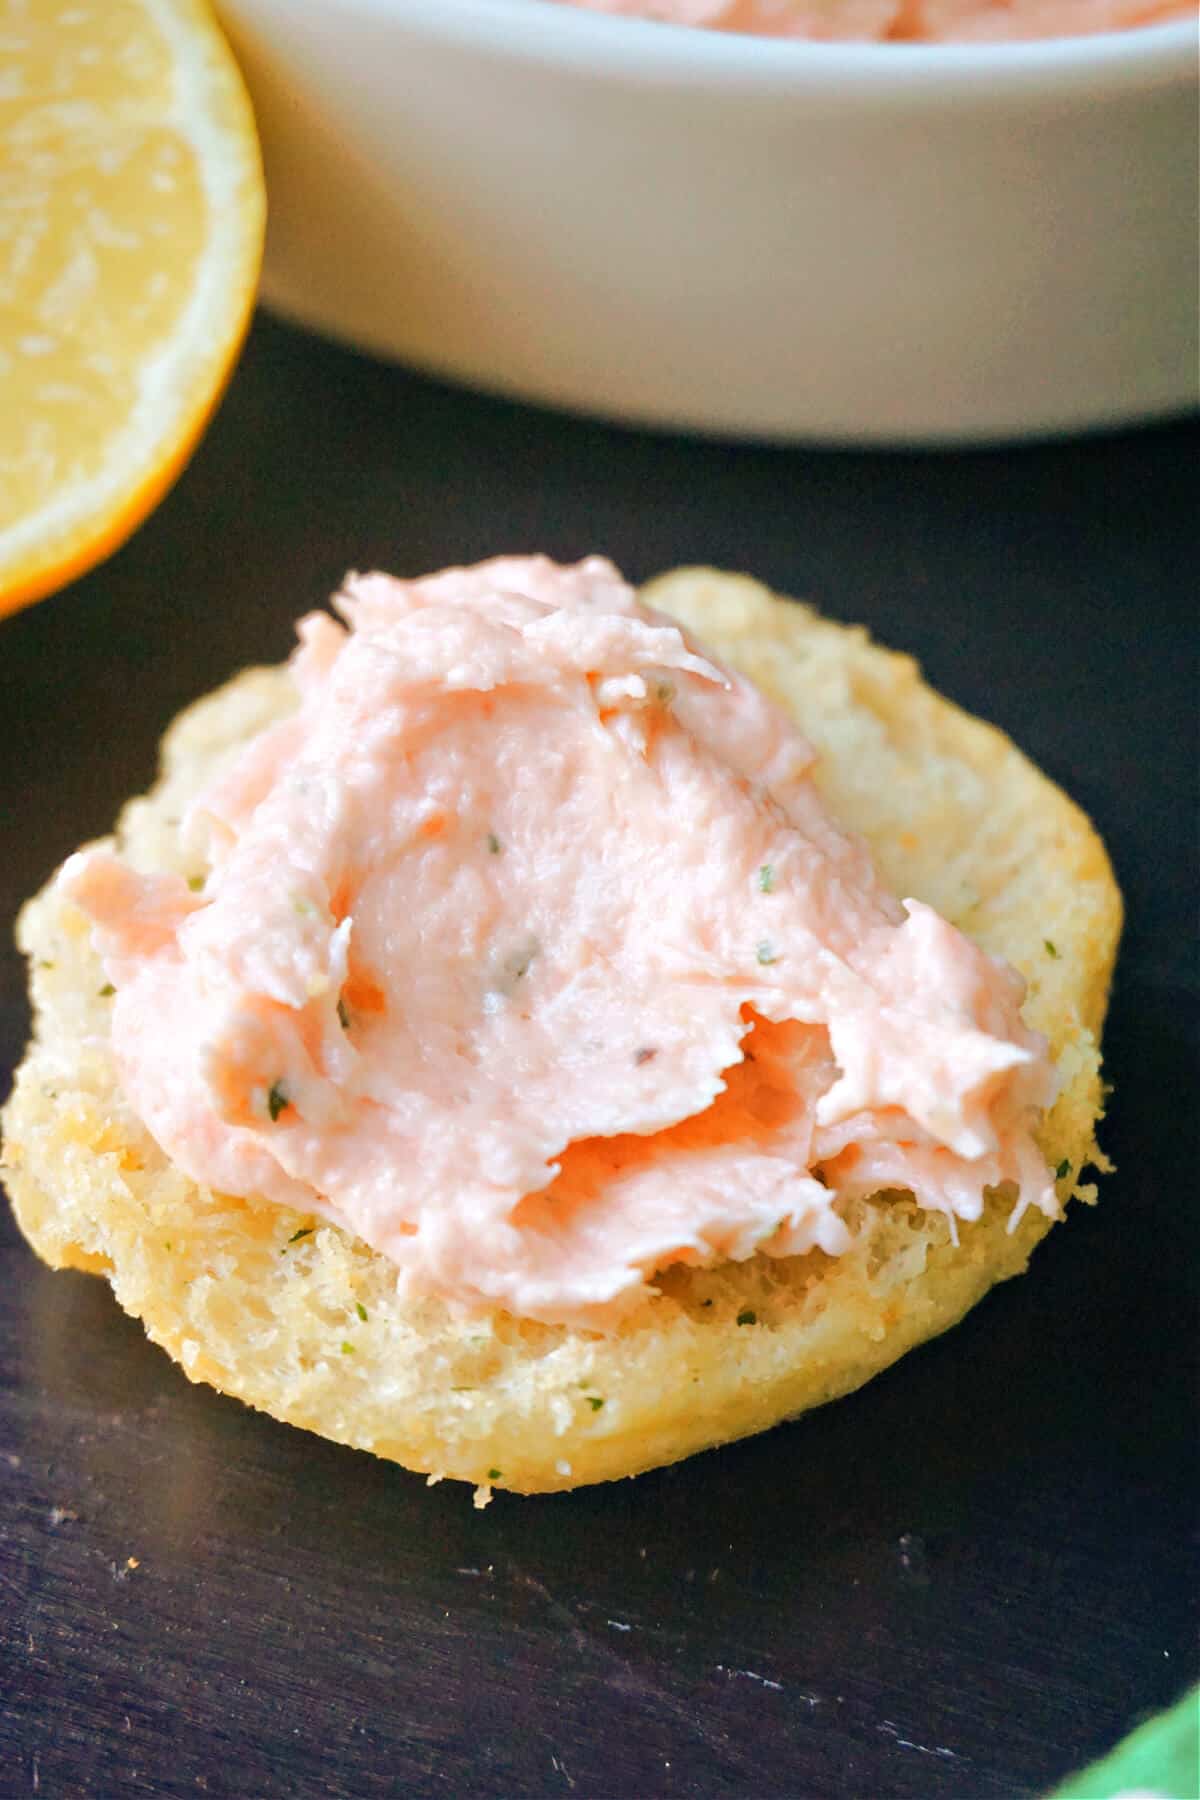 A crostini with smoked salmon pate spread over.